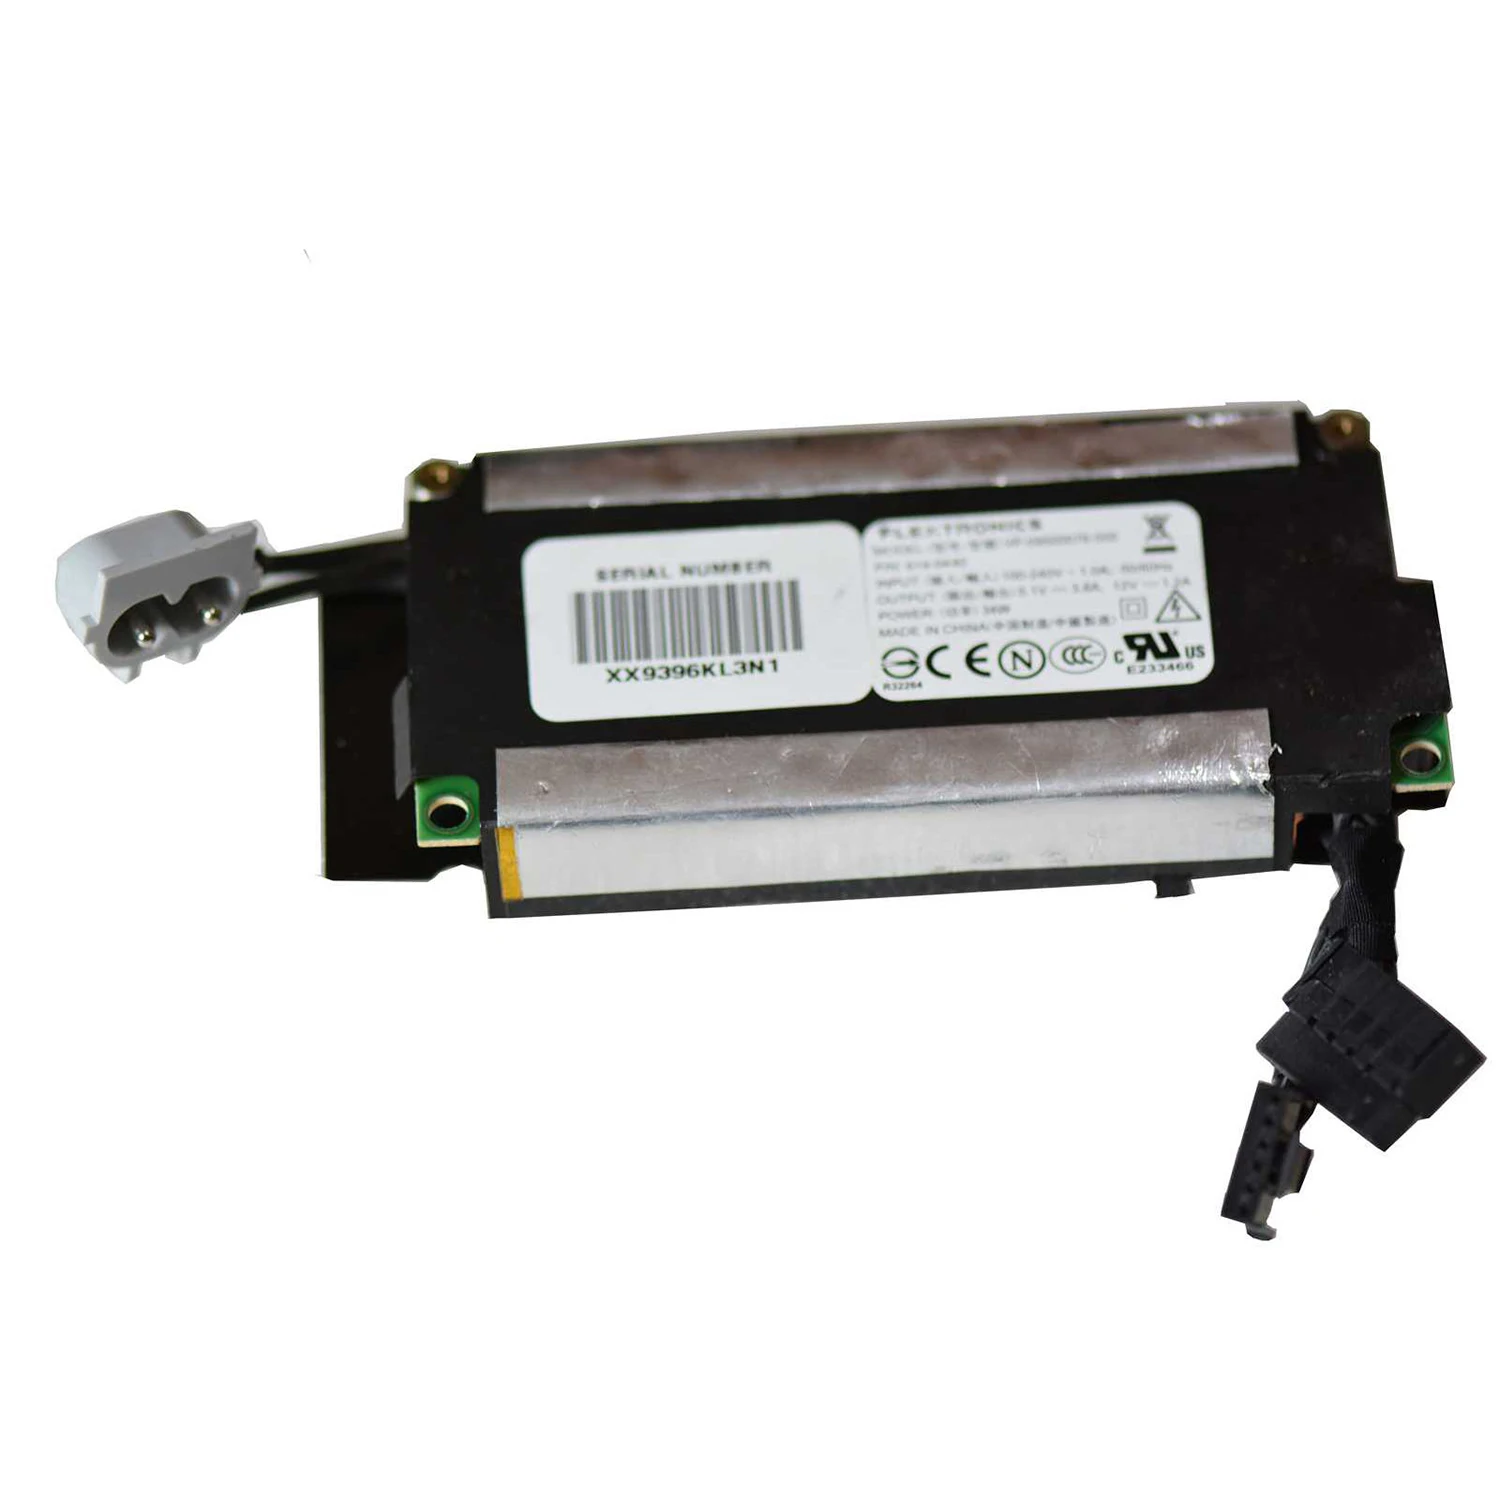 

Power Supply Charge Board Time Capsule for Apple MacBook A1254 A1302 614-0440 614-0414